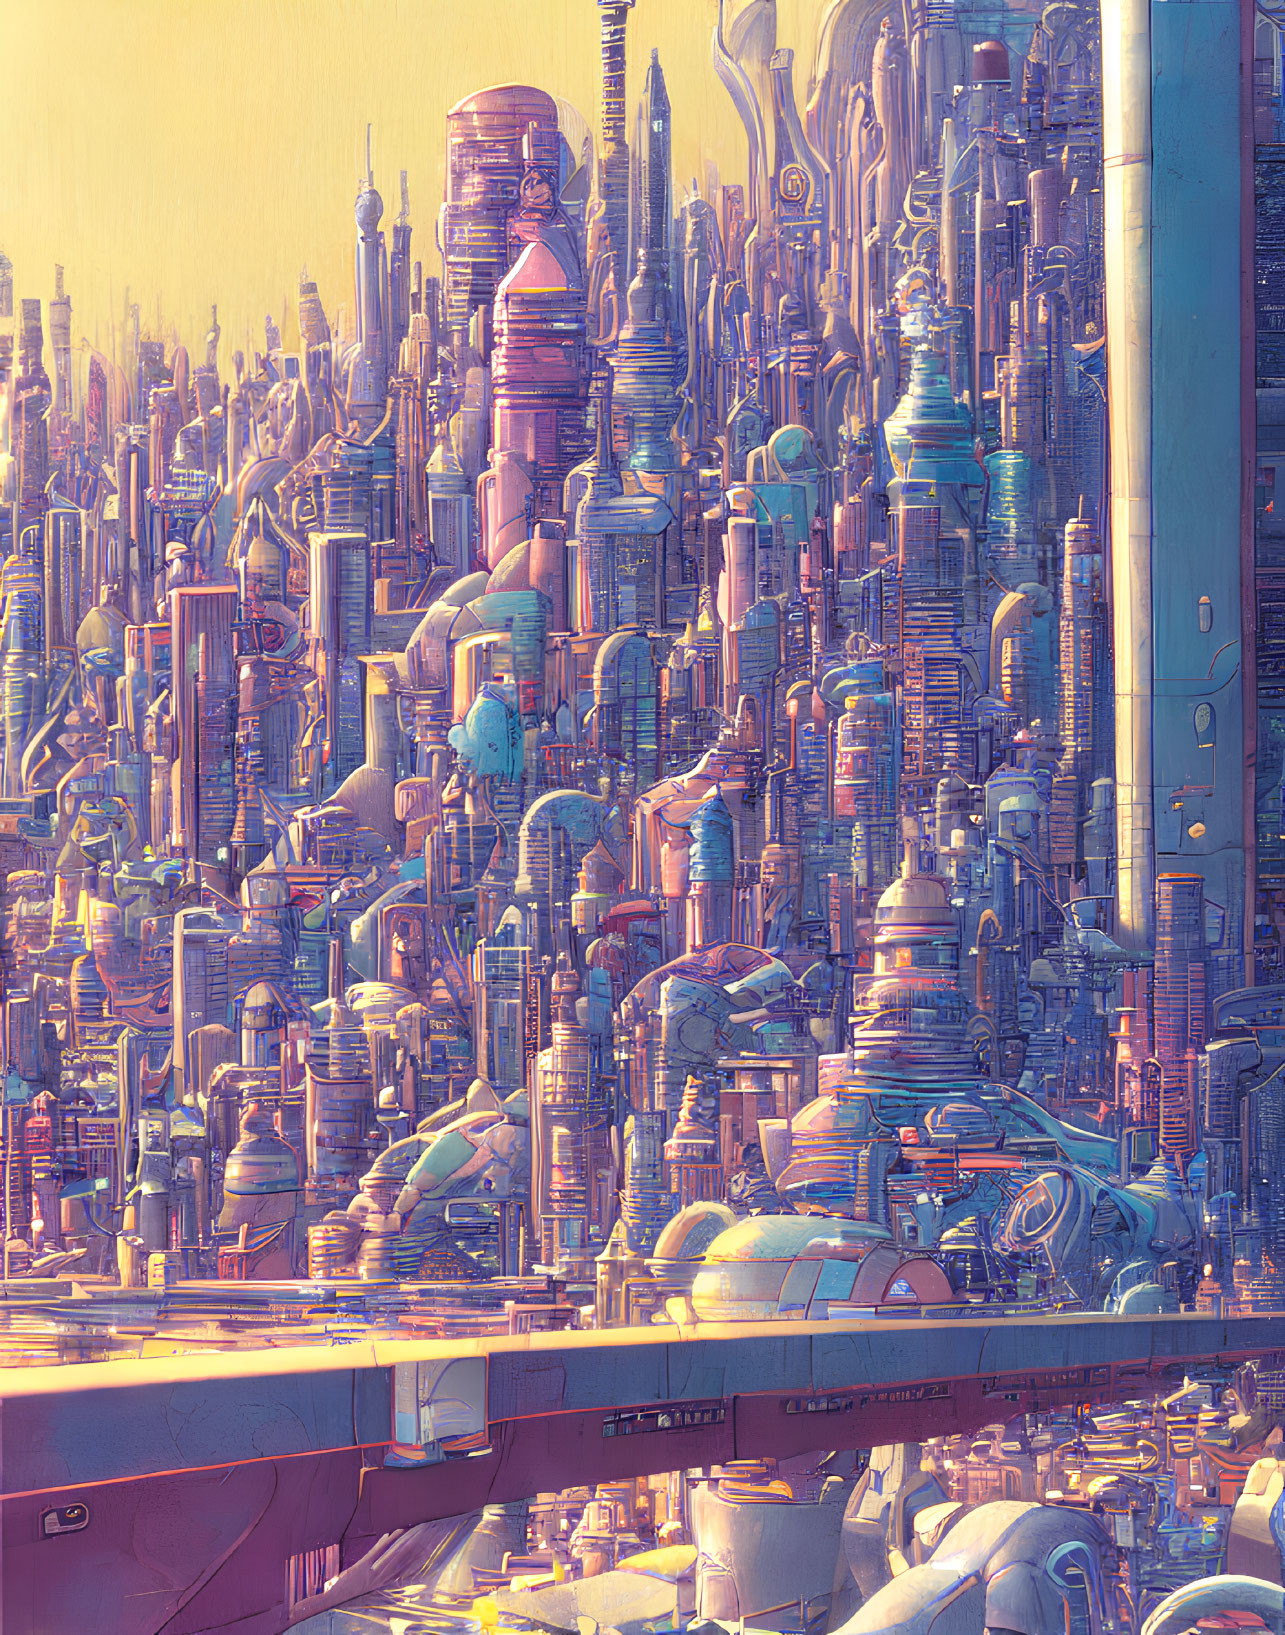 Detailed Futuristic Cityscape with Colorful Skyscrapers